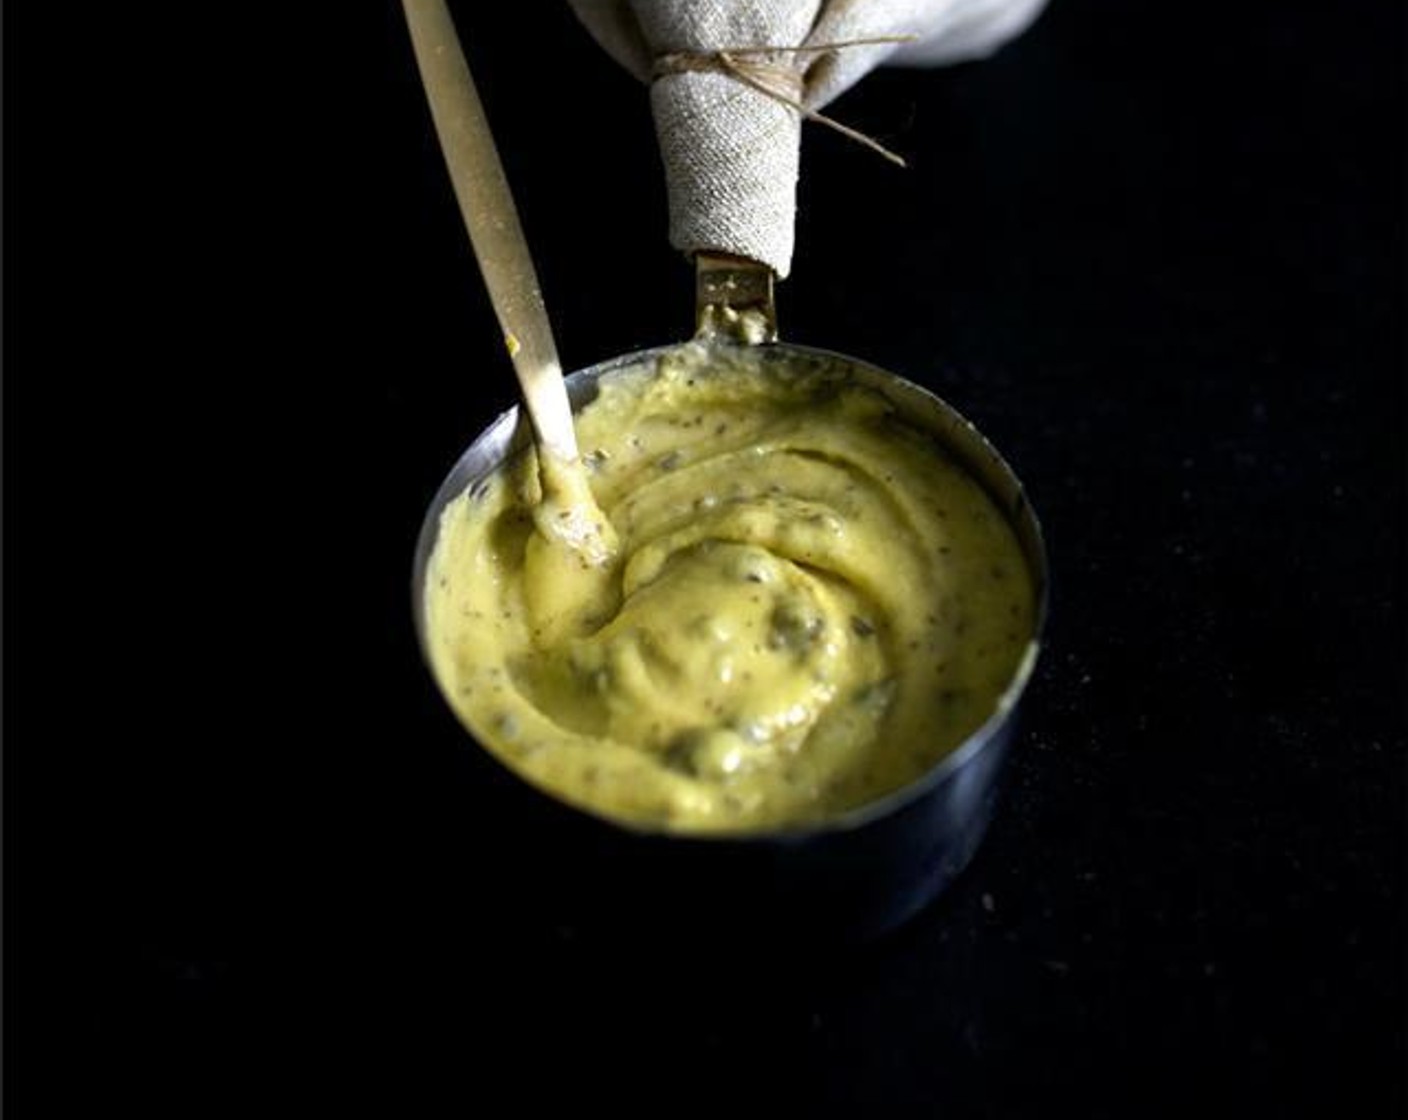 Mashed Potato Butter Aioli w/ Fried Capers